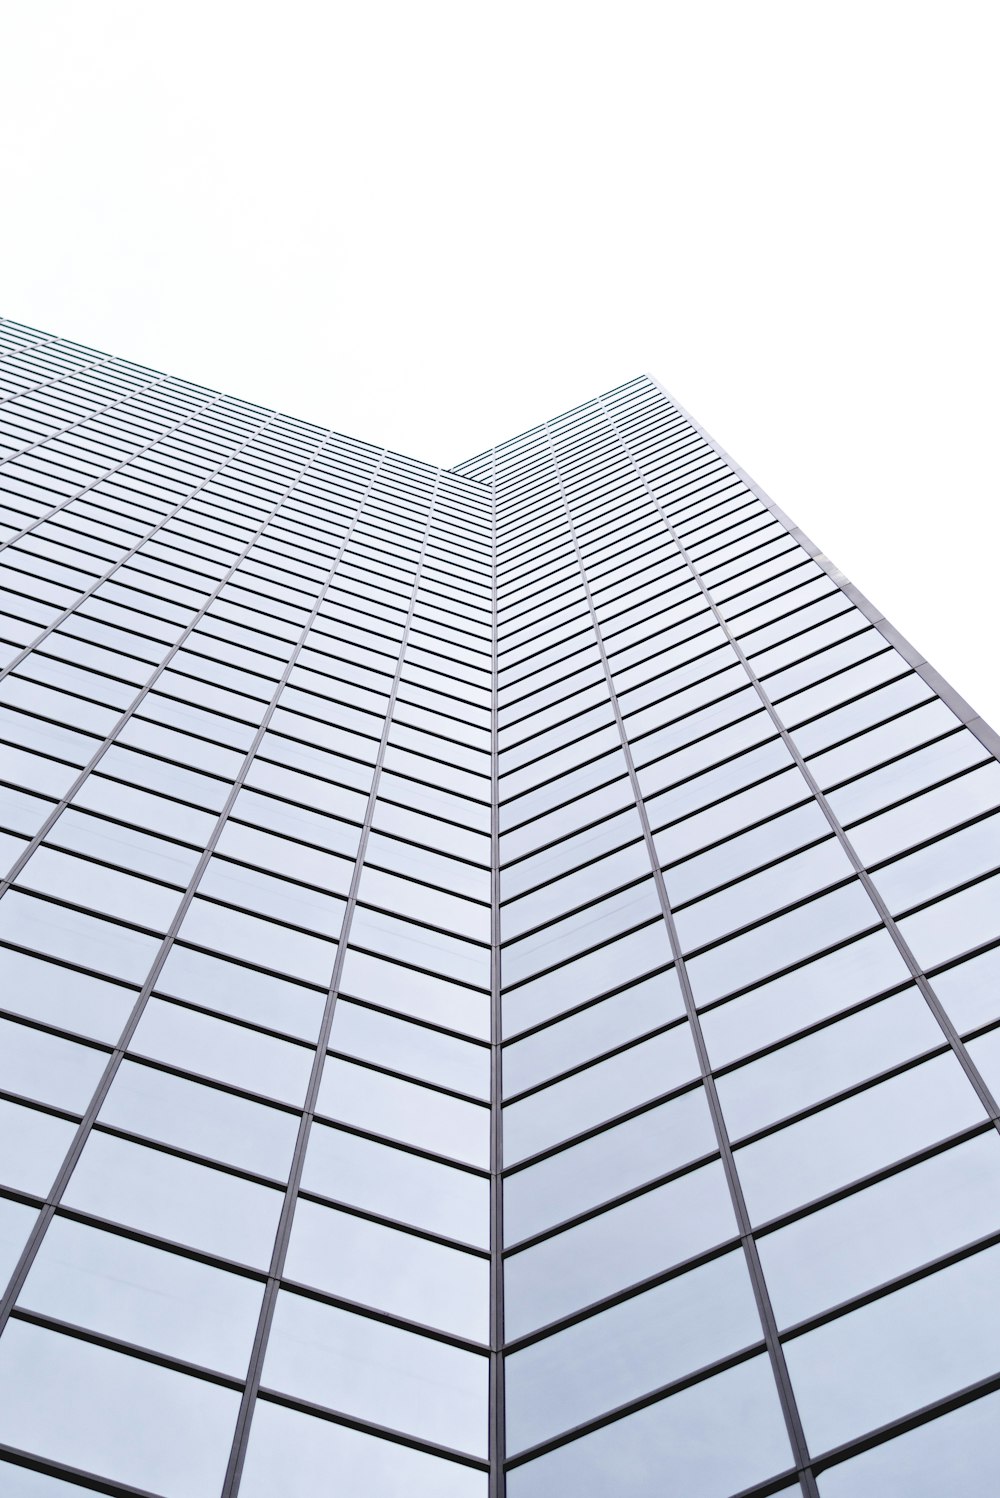 low-angle photography of glass high rise building